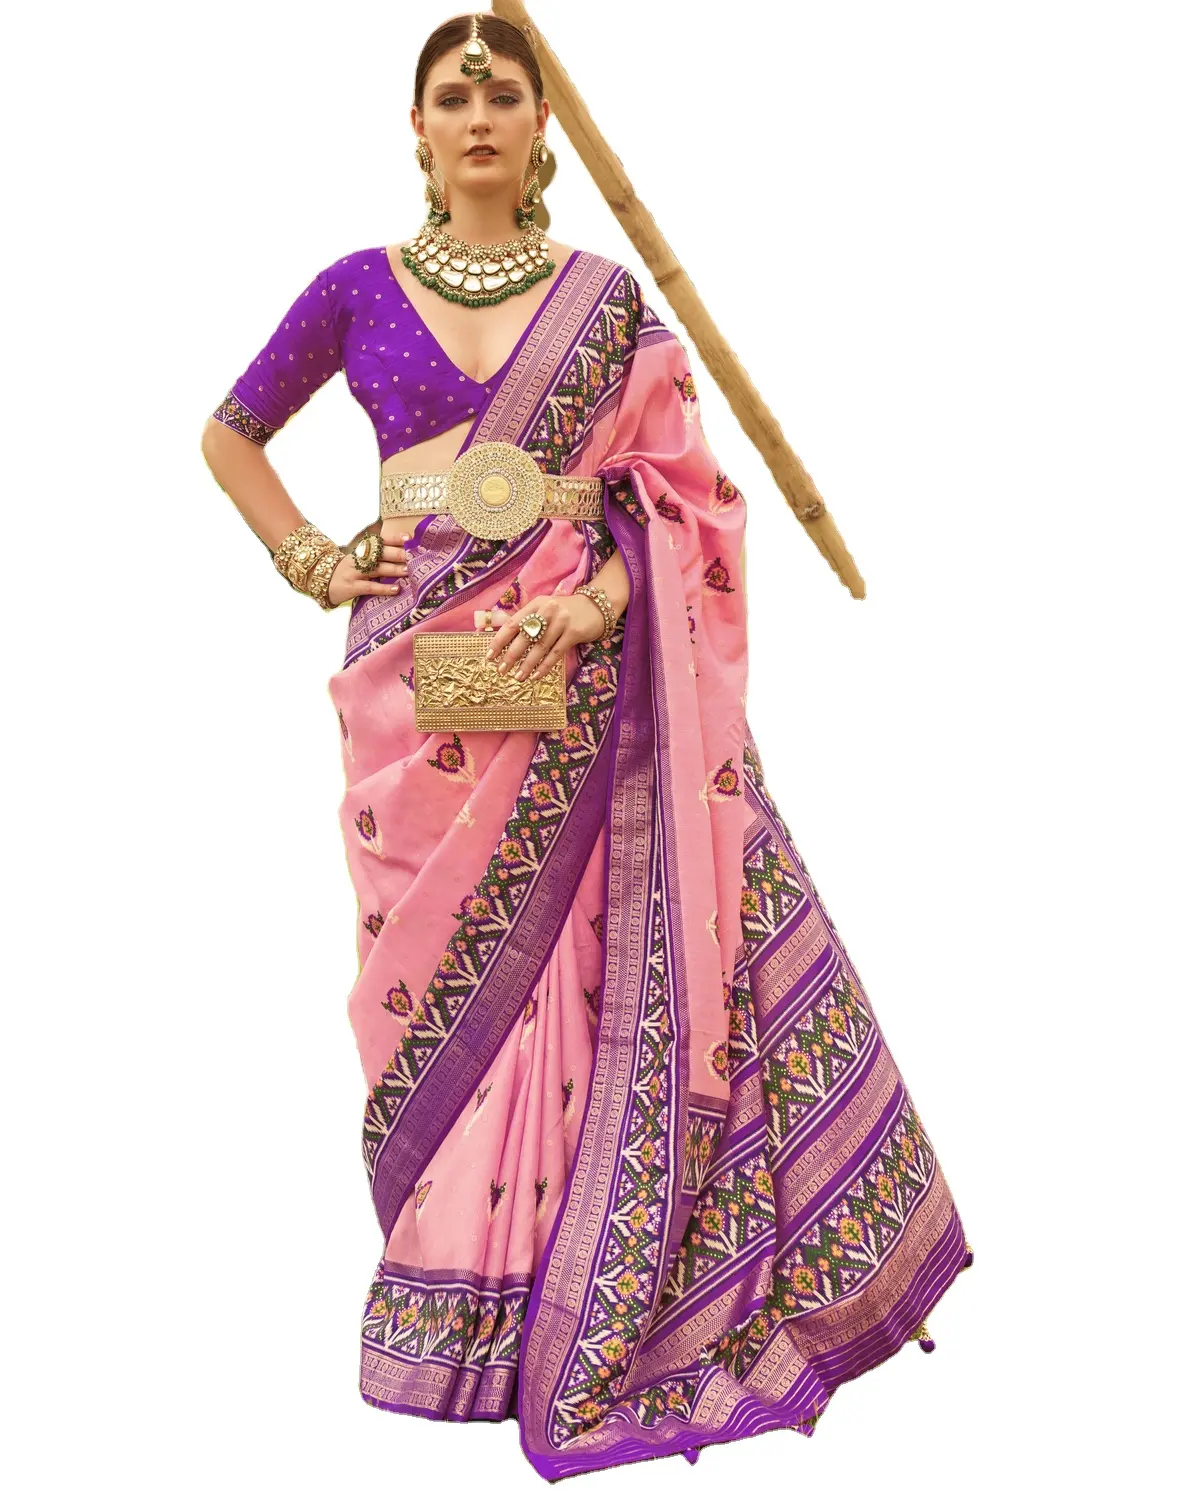 Indian Designer Women Silk Saree With Gold Printed Waist (Kandora) Belt With Unstiched Blouse For Partywear Occasion